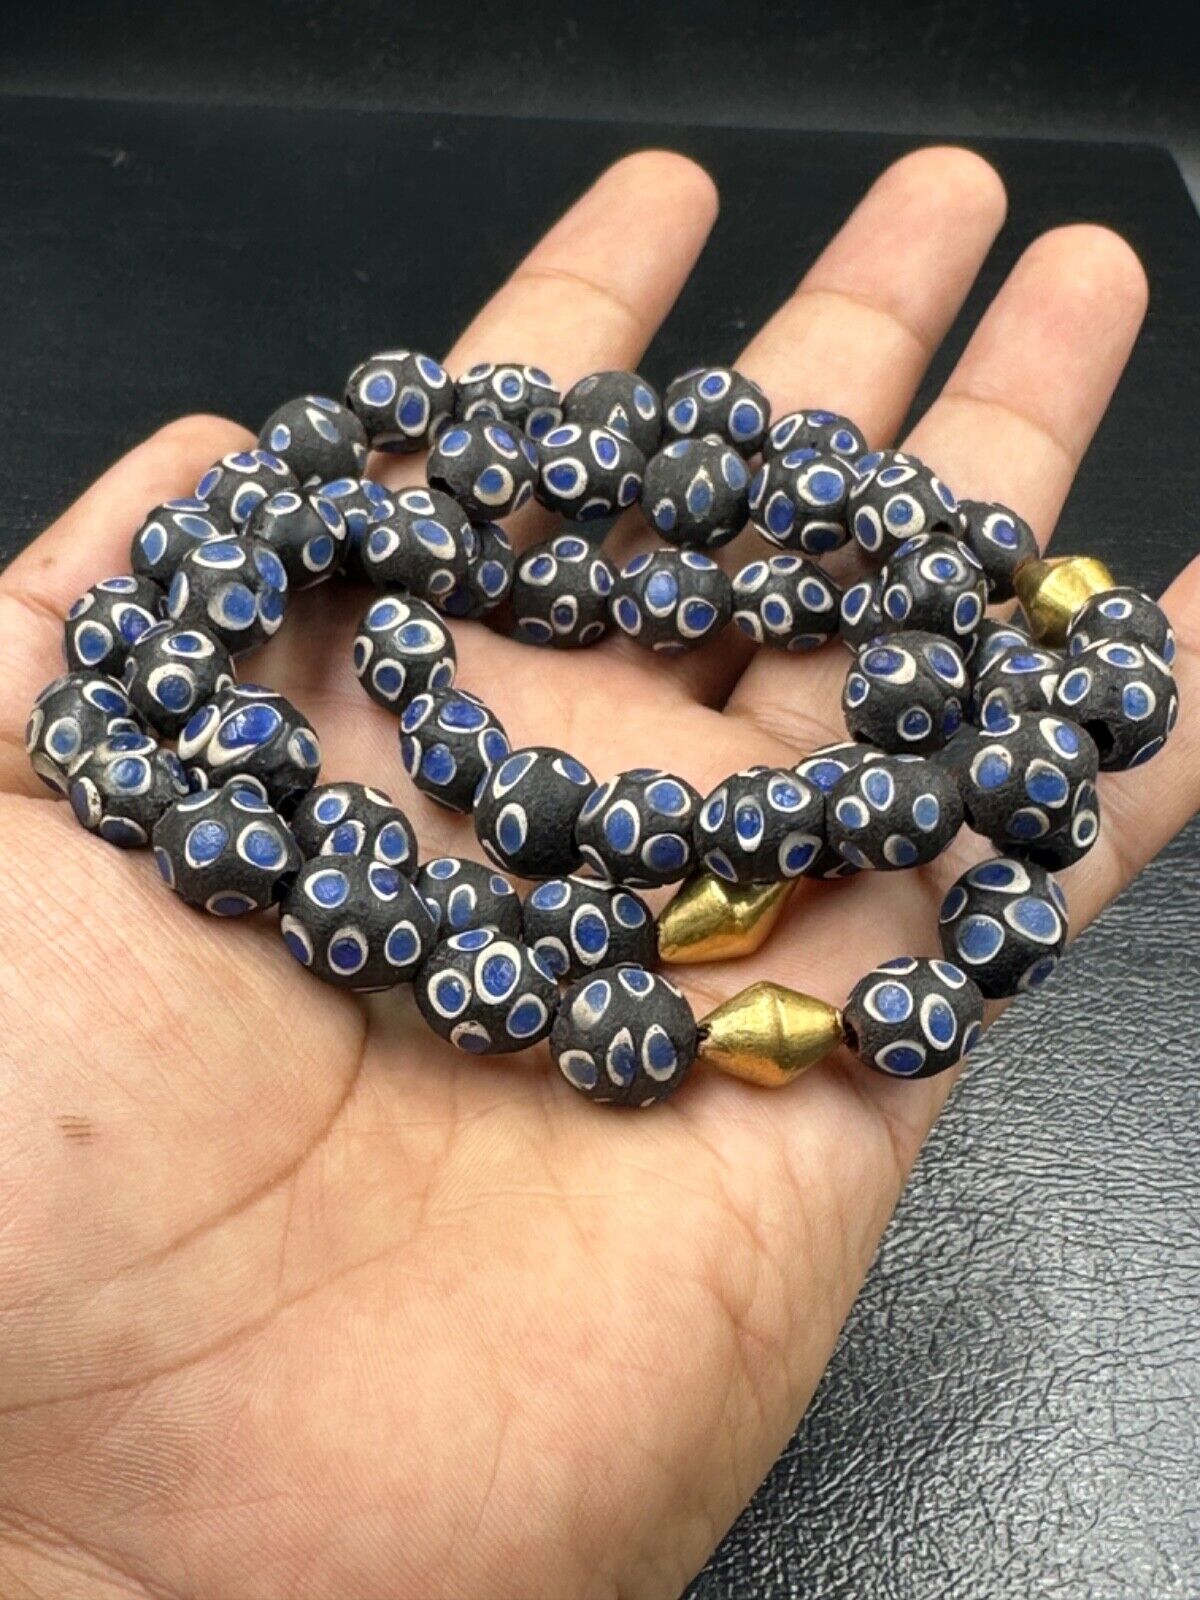 Beautiful old afghani gabri glass beads necklace with 3 pieces real gold wax